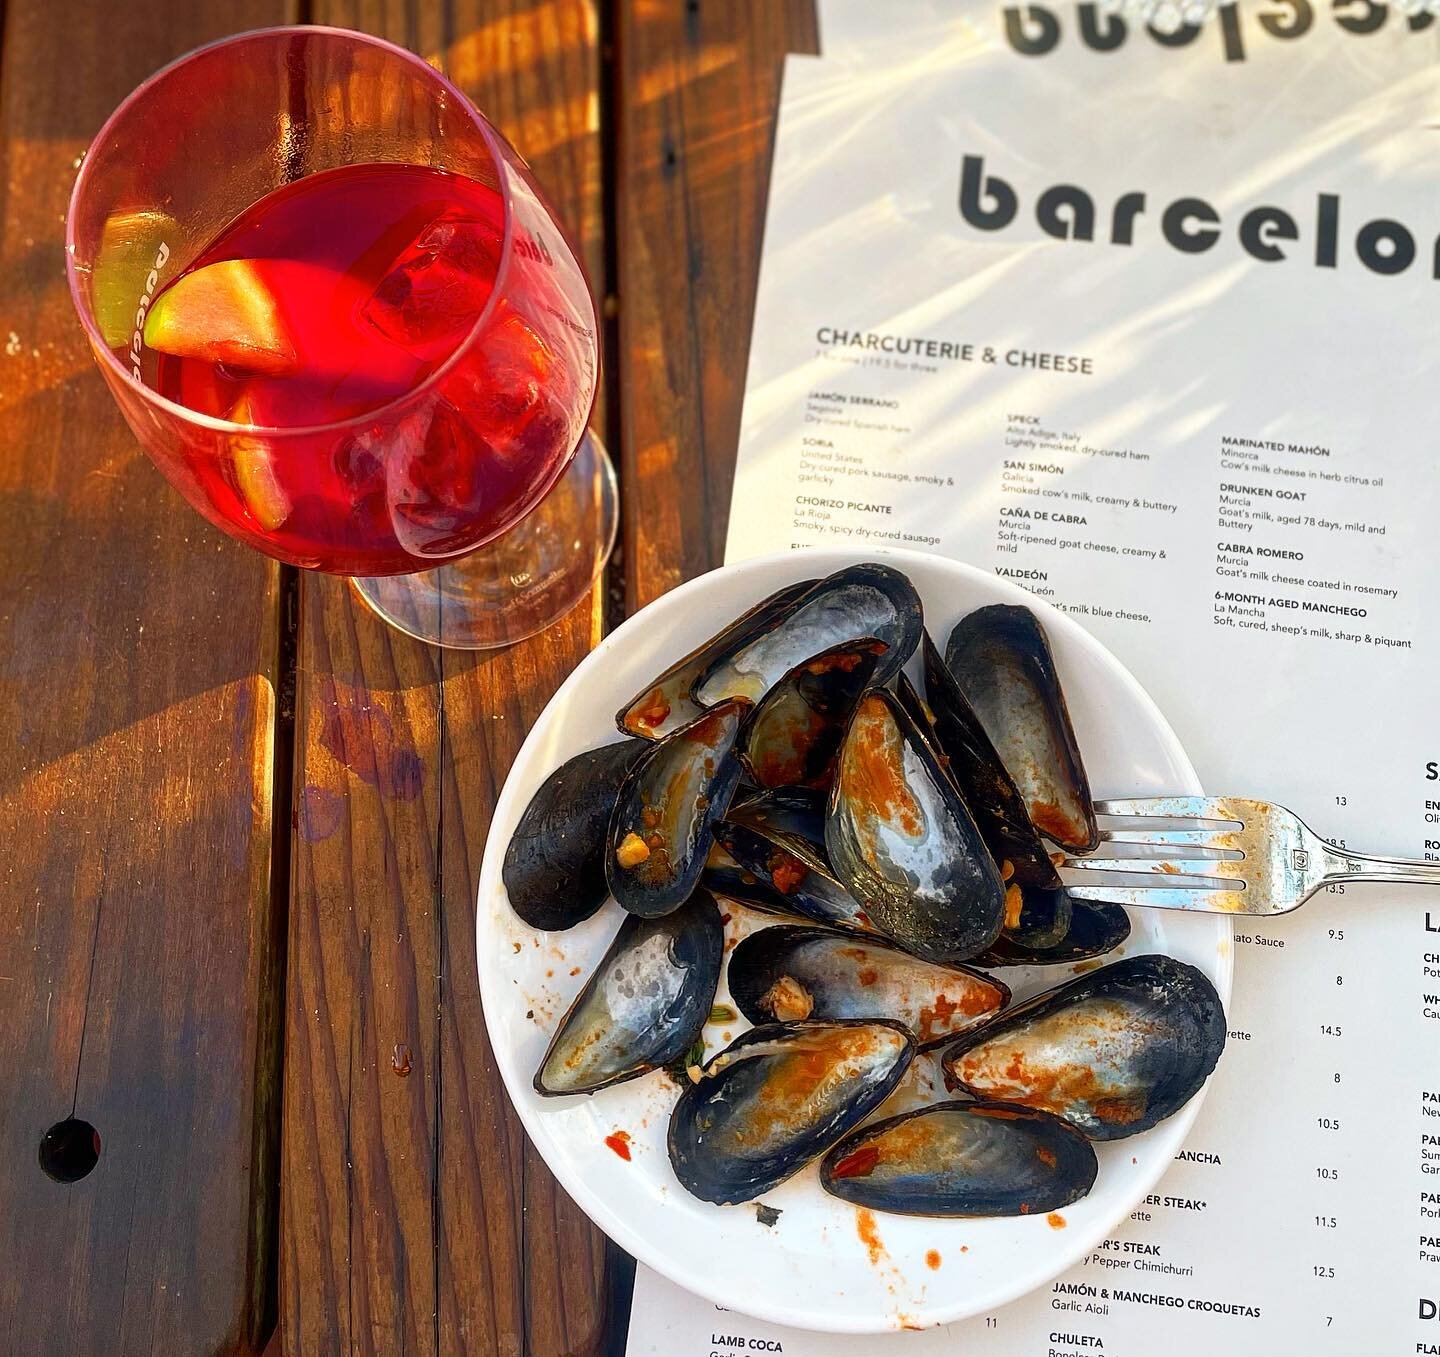 Mussels and sangria and many other things